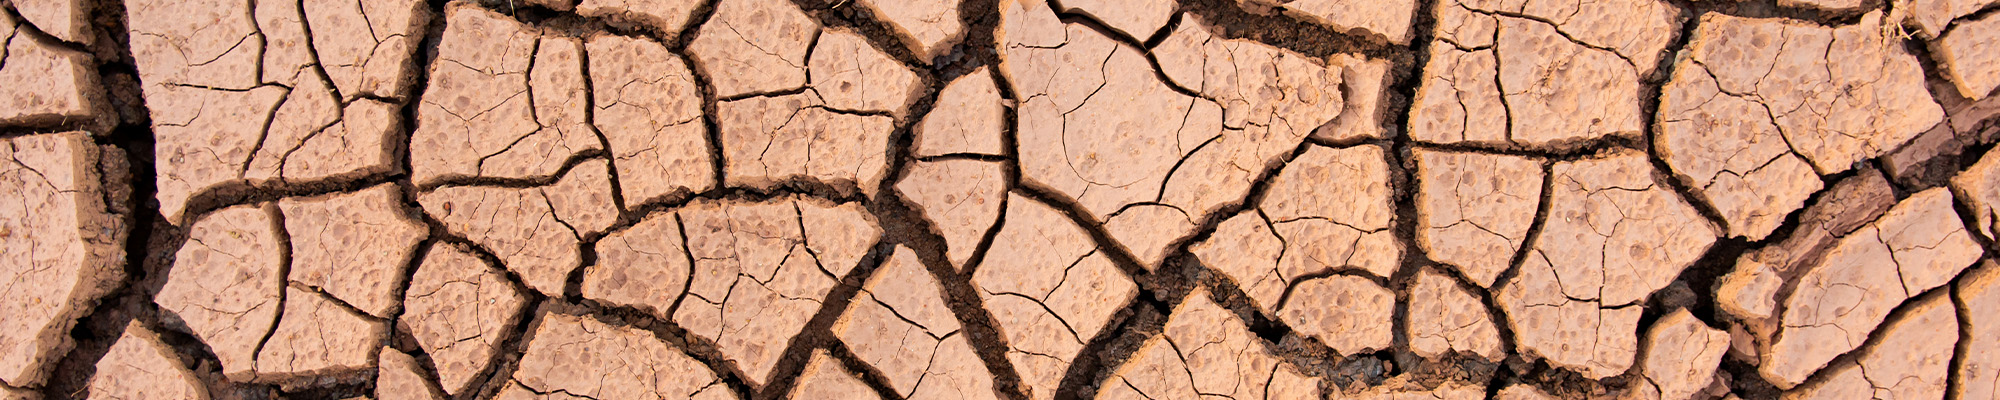 Dry dirt, cracked to resemble what dry, cracked skin feels like.